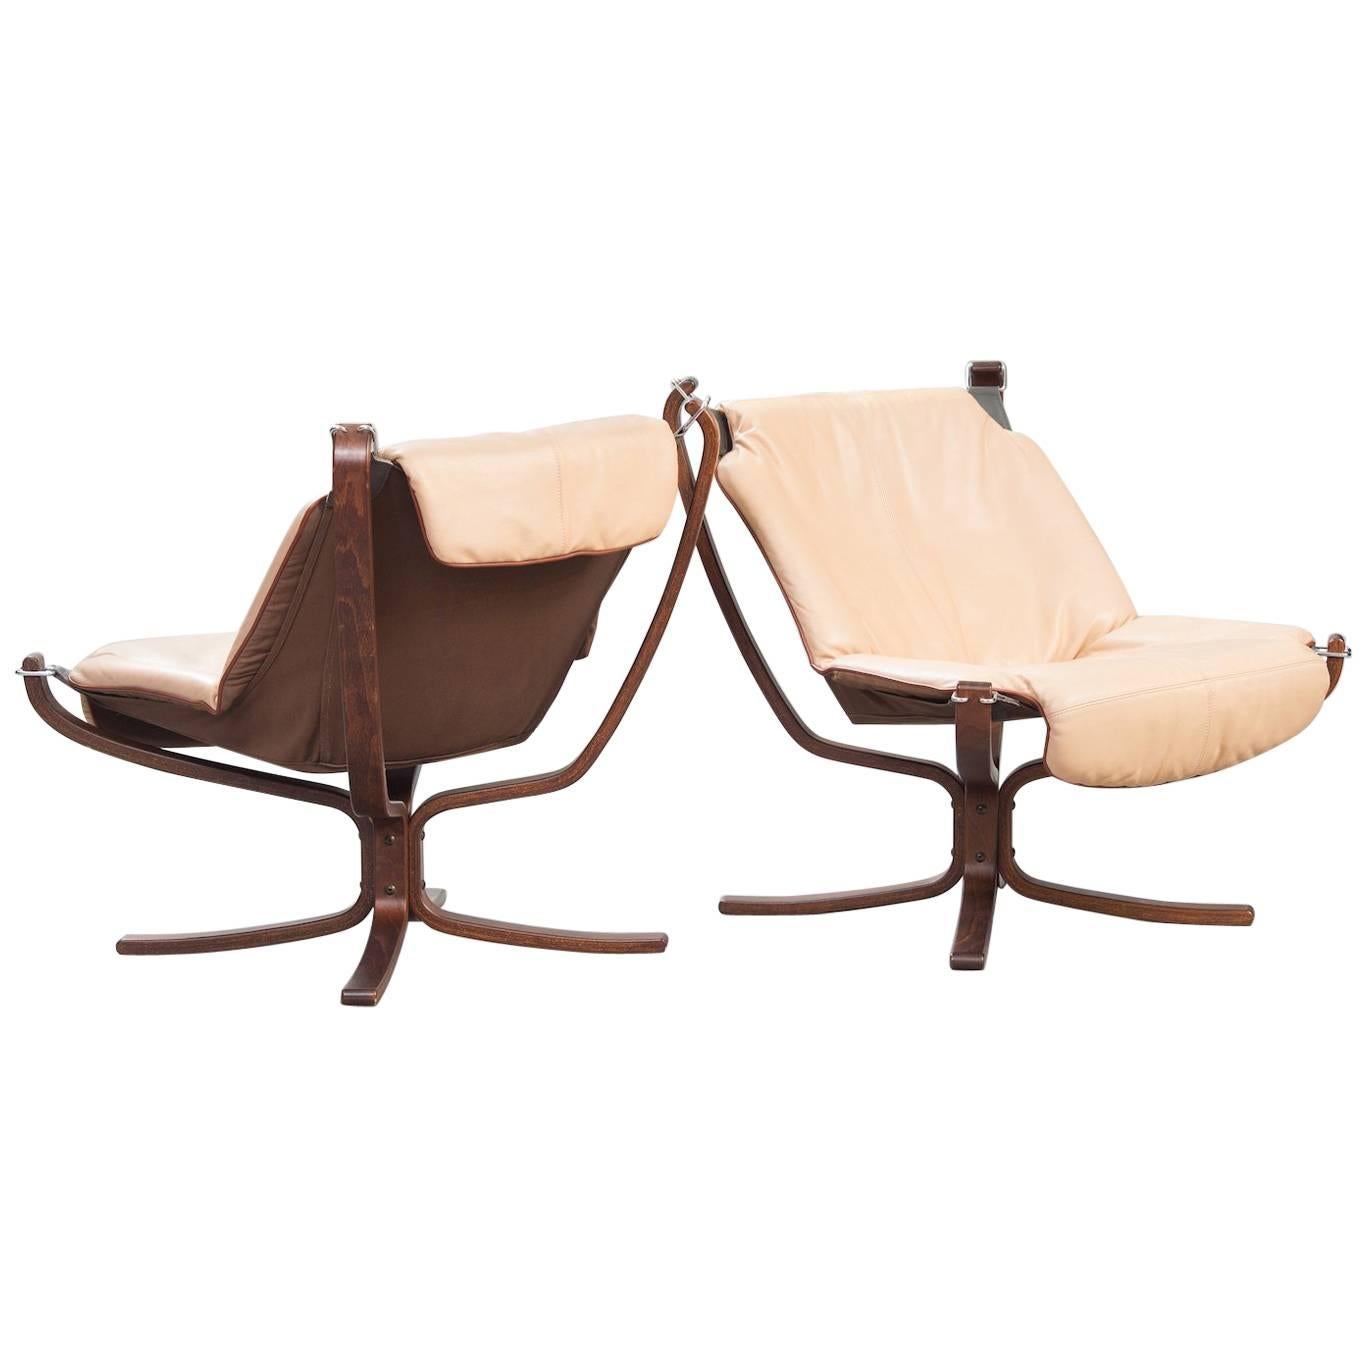 One Pair of Sigurd Ressel “Falcon” Chairs for Vatne Møbler